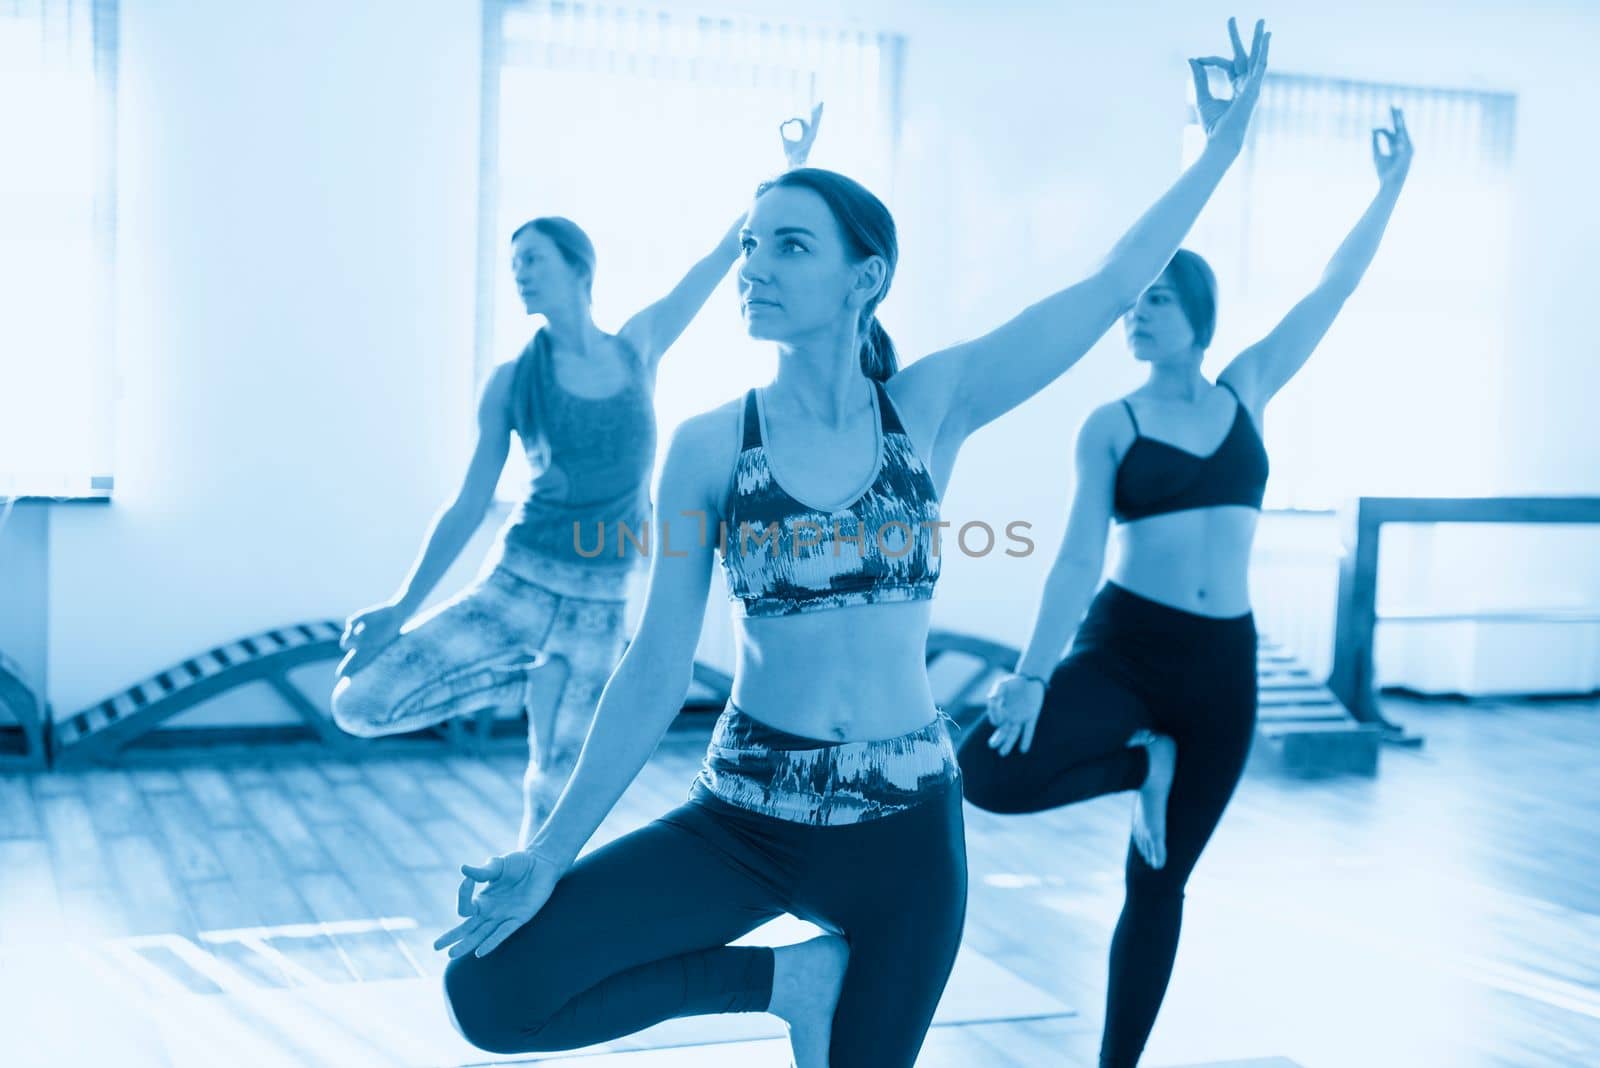 Yoga Class, Group of People Relaxing and Doing Yoga pose